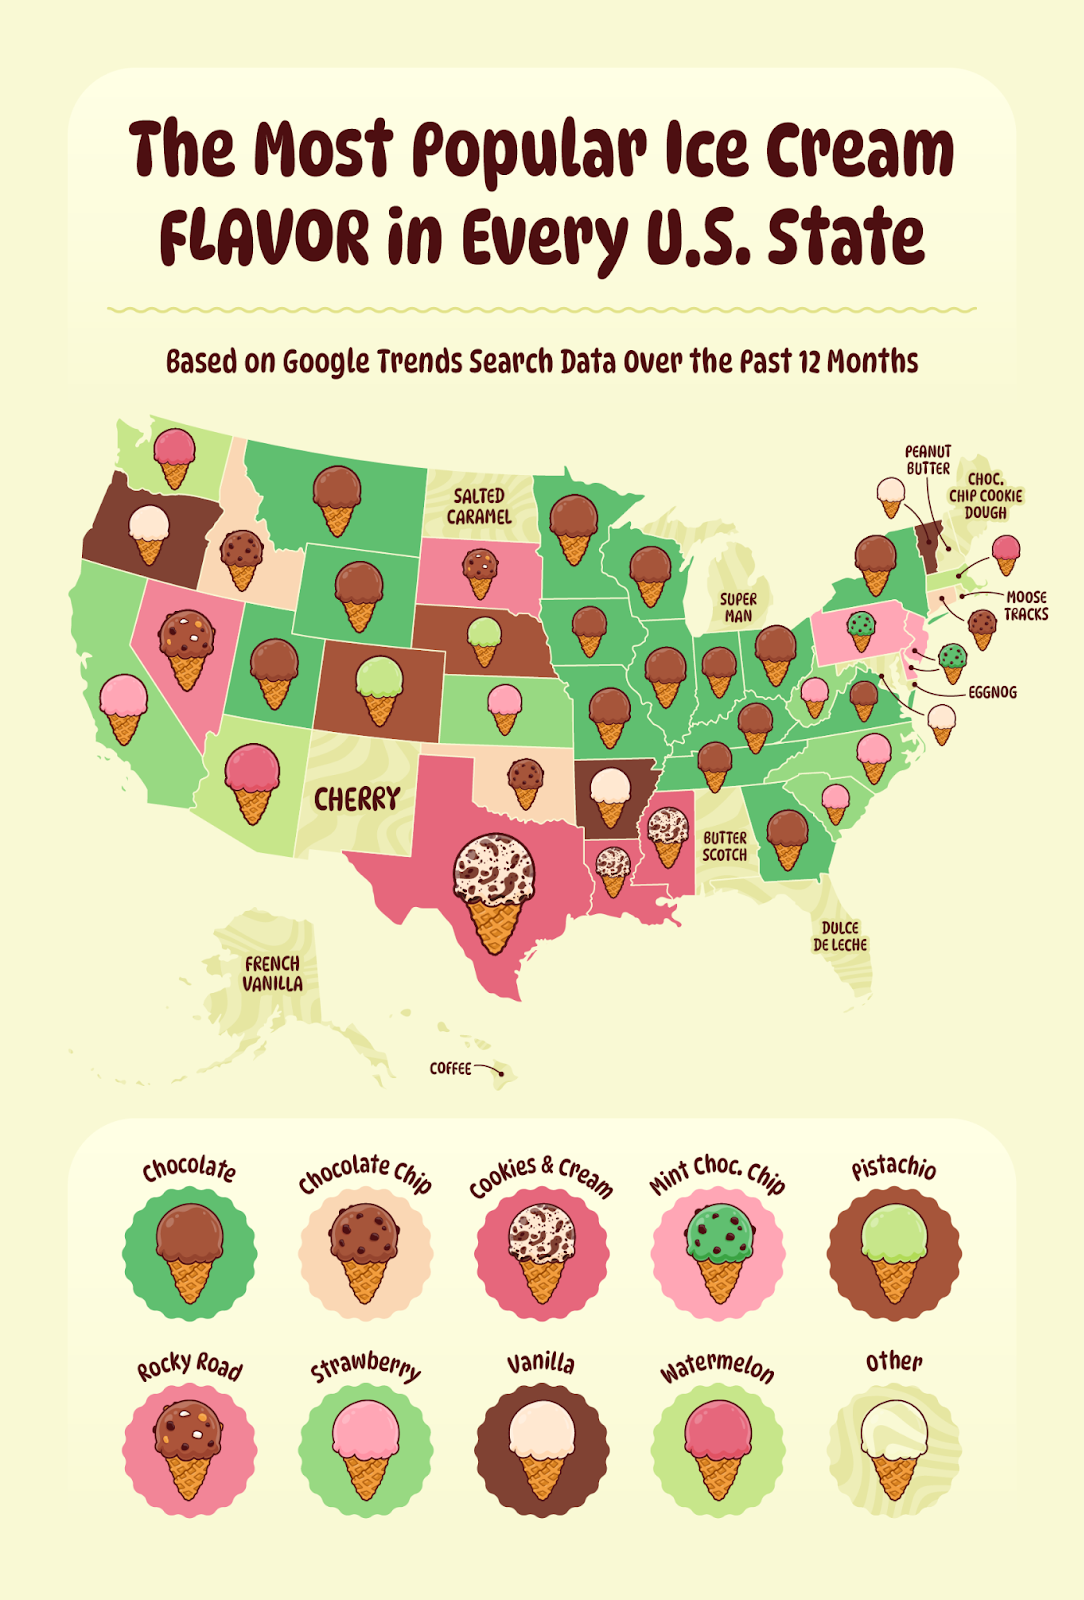 A map of the most popular ice cream flavor in each state.